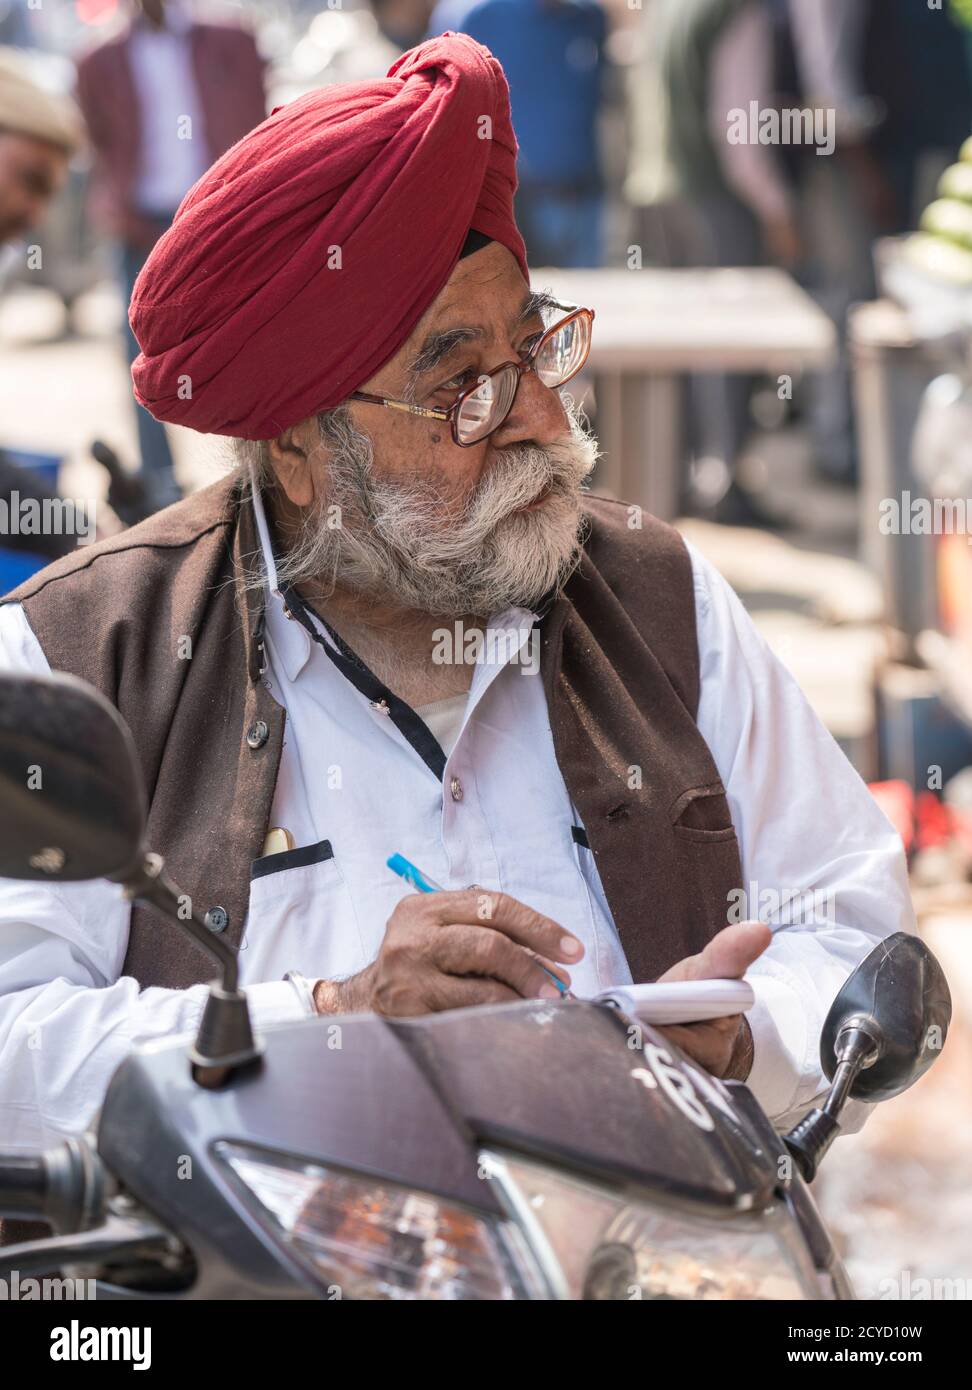 New Delhi, India - February 19, 2018 - Man With Grey Beard and Turban Writes In His Notebook While Talking To Person Off Screen Stock Photo